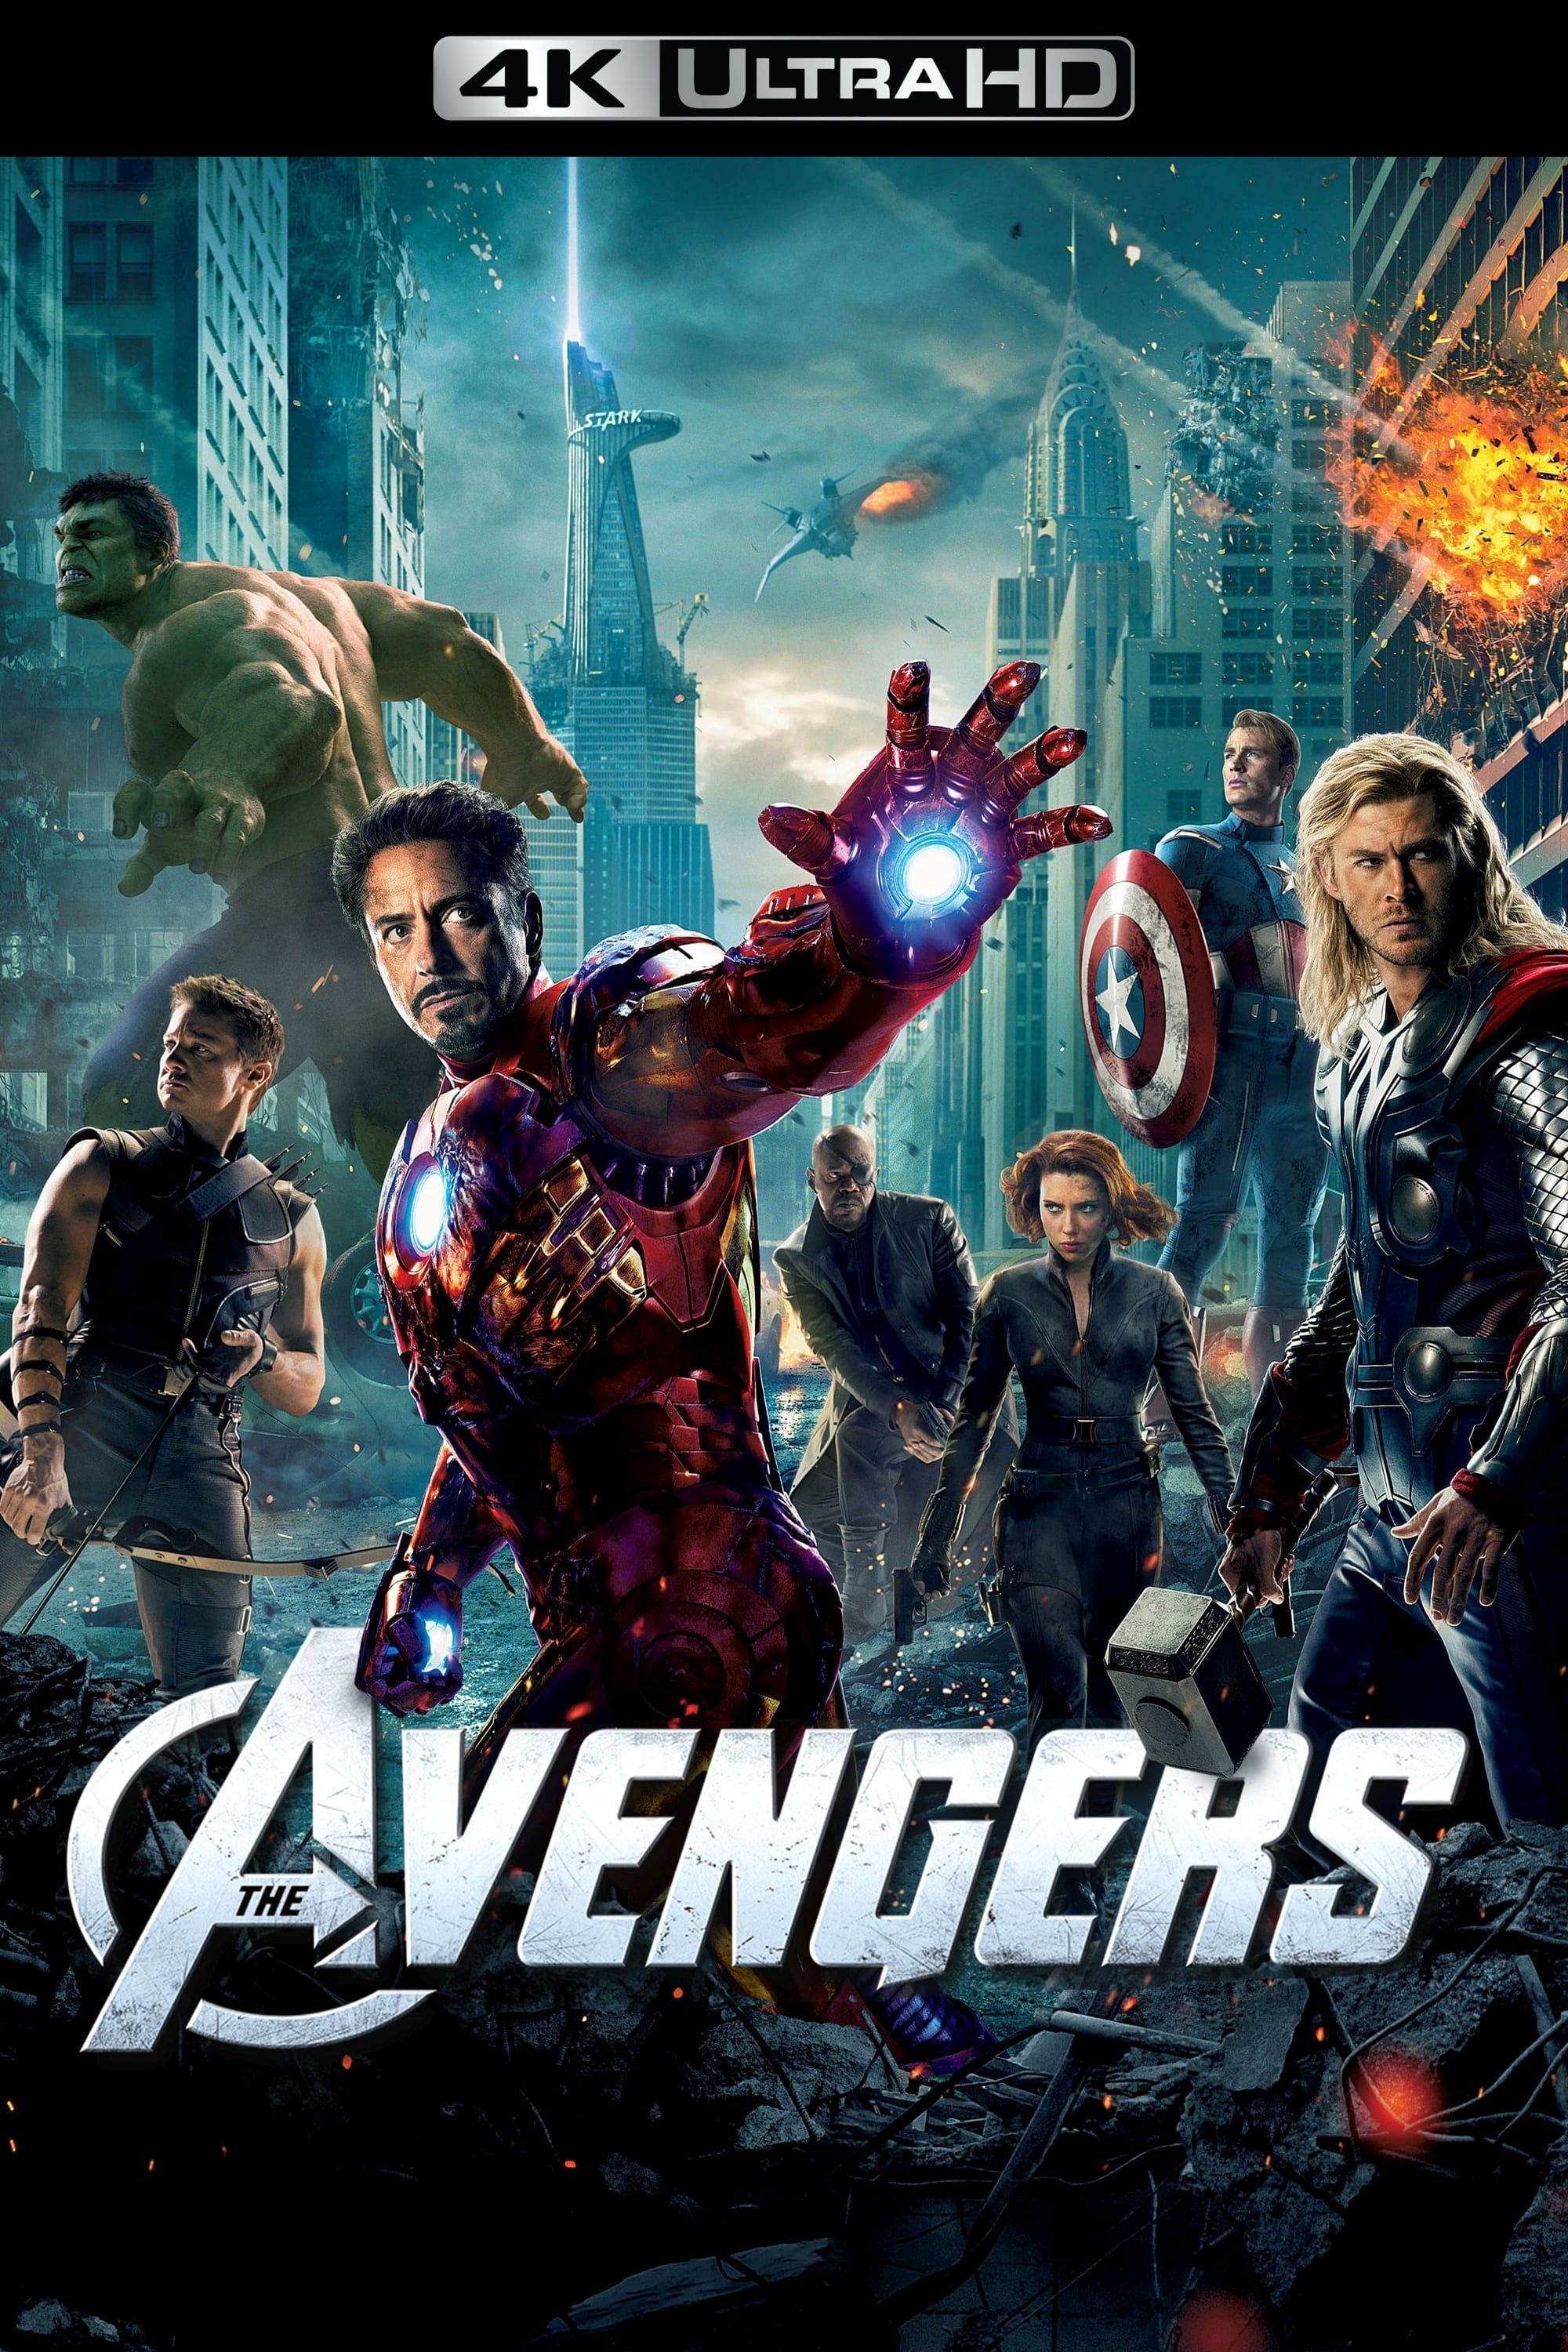 movie review of the avengers